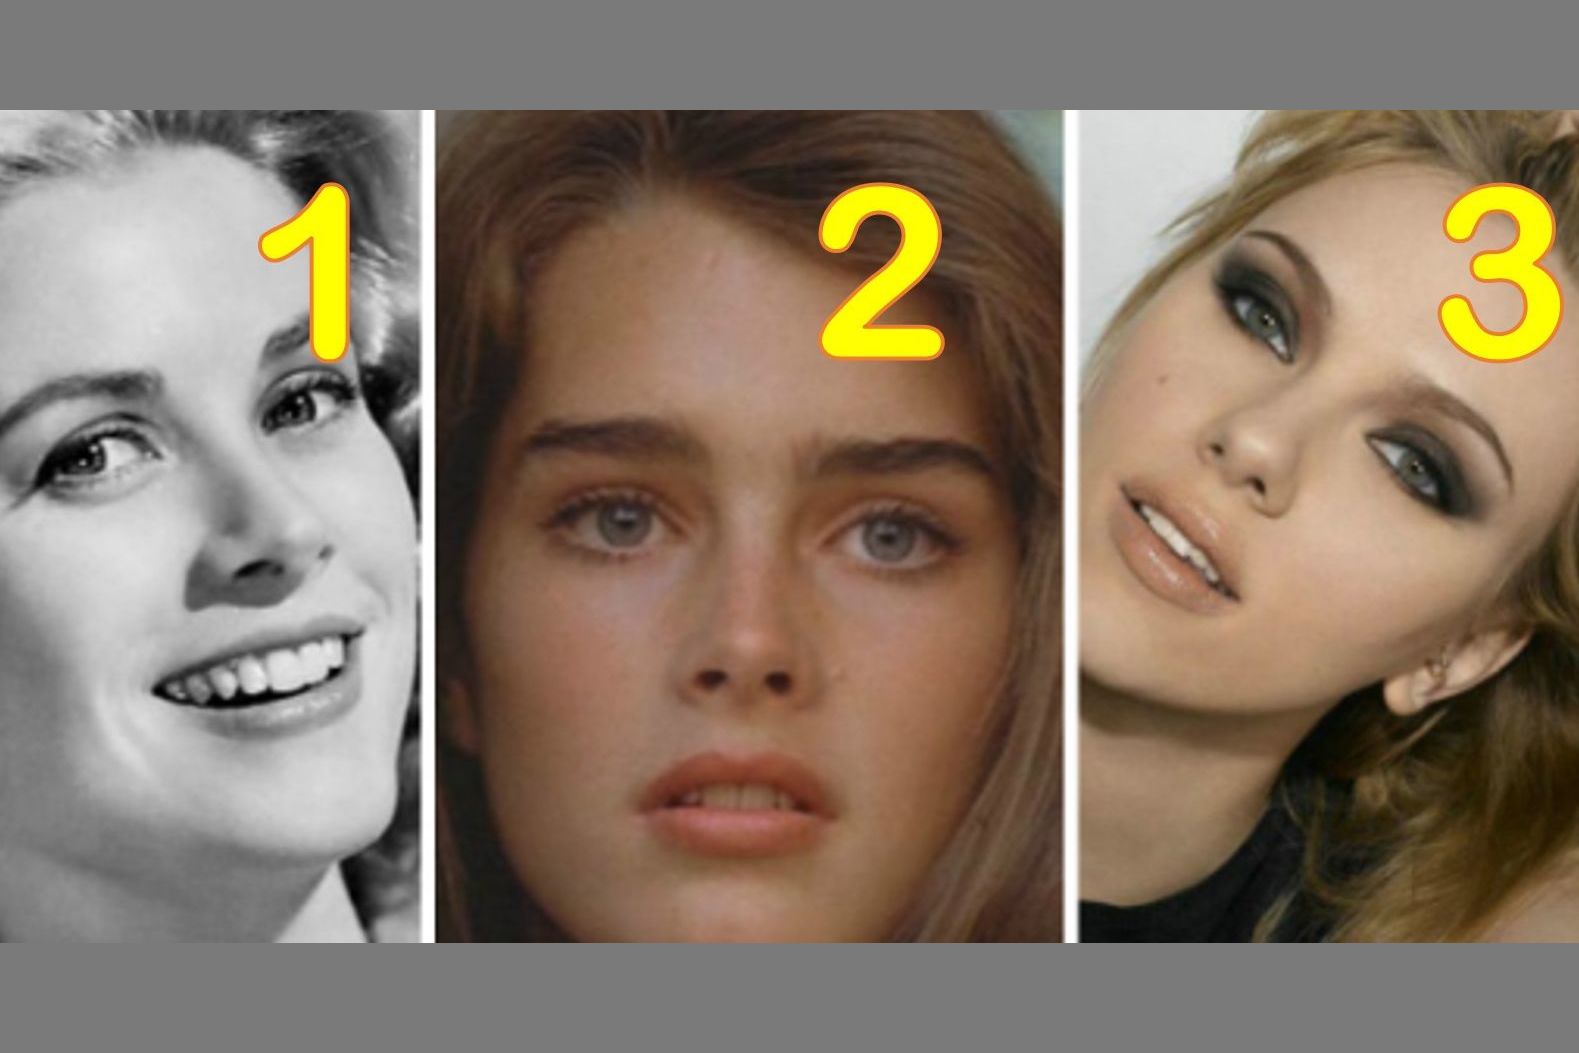 Can You Name The 50 Most Beautiful Women Of All Time?